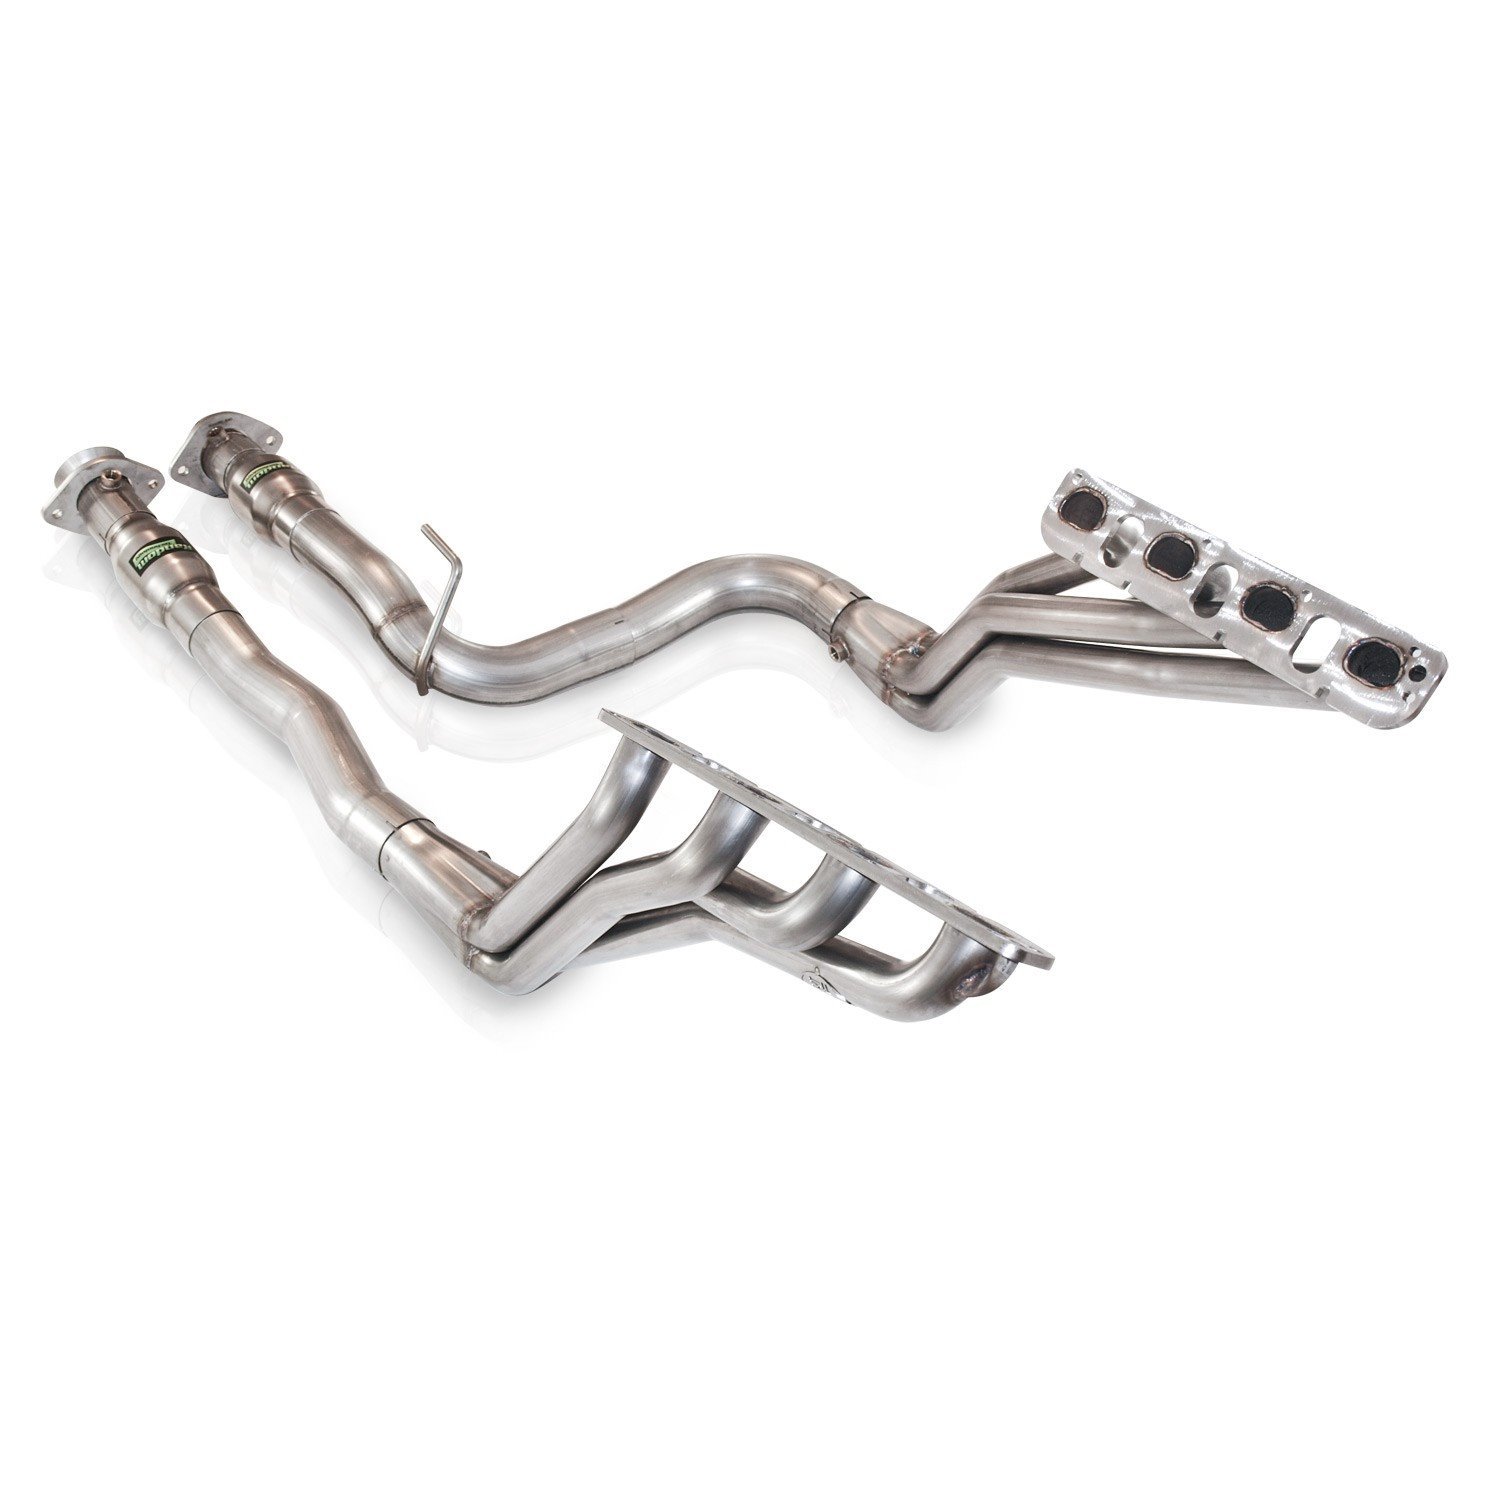 2006-2010 Jeep SRT8- RT Headers with 1.875 D shaped primary tubes and 3 slip fit collector 3 lead pi